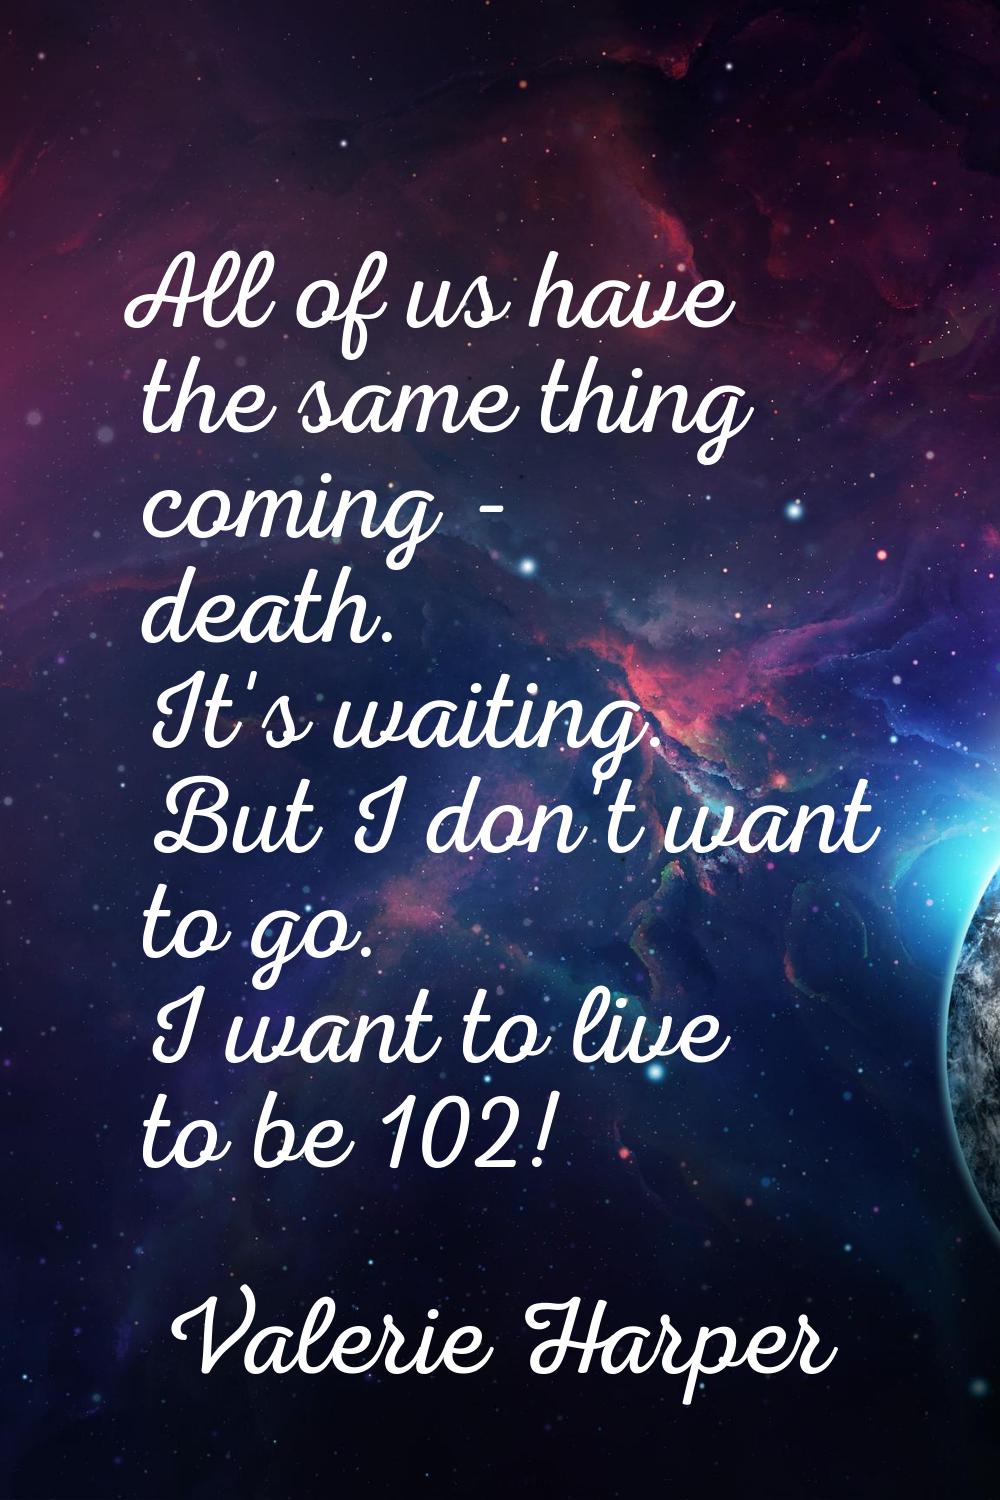 All of us have the same thing coming - death. It's waiting. But I don't want to go. I want to live 